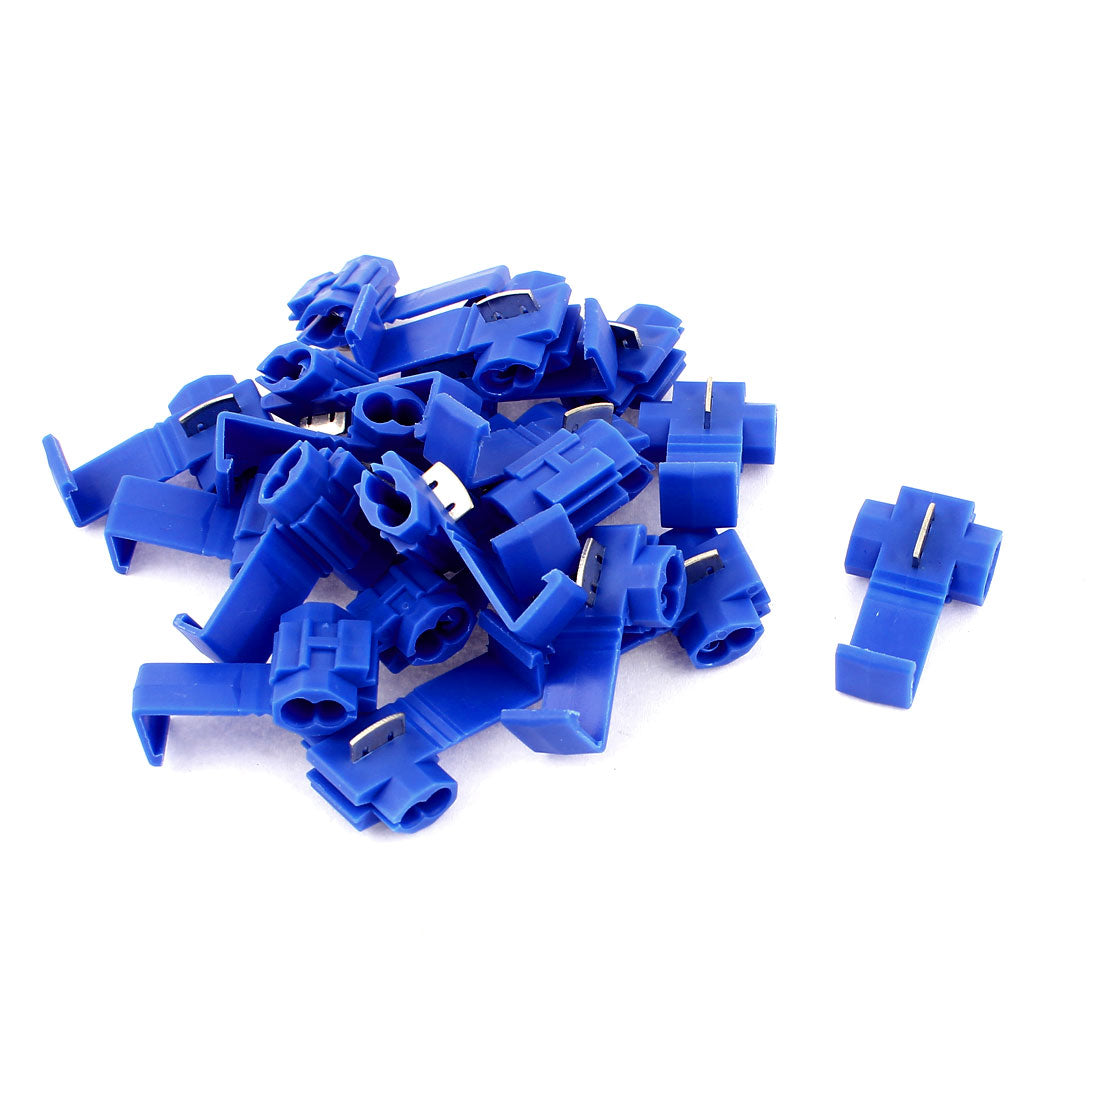 uxcell Uxcell 20 Pcs Blue Electrical Cable Connectors Quick Splice 18-14AWG Lock Wire Terminals Crimp